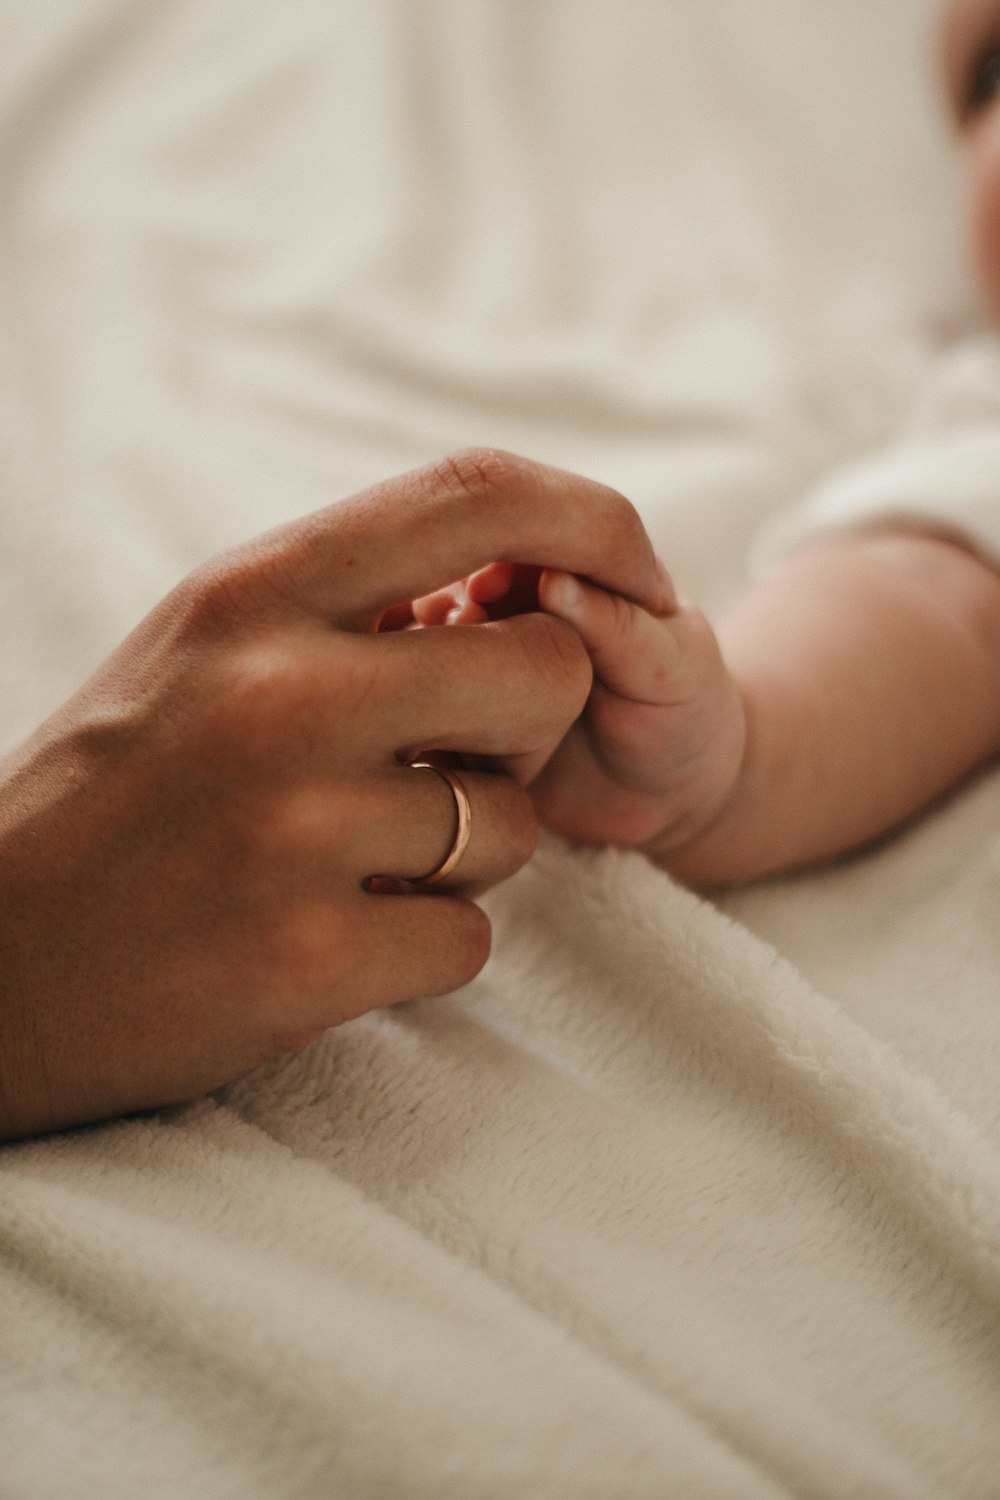 person holding babys hand